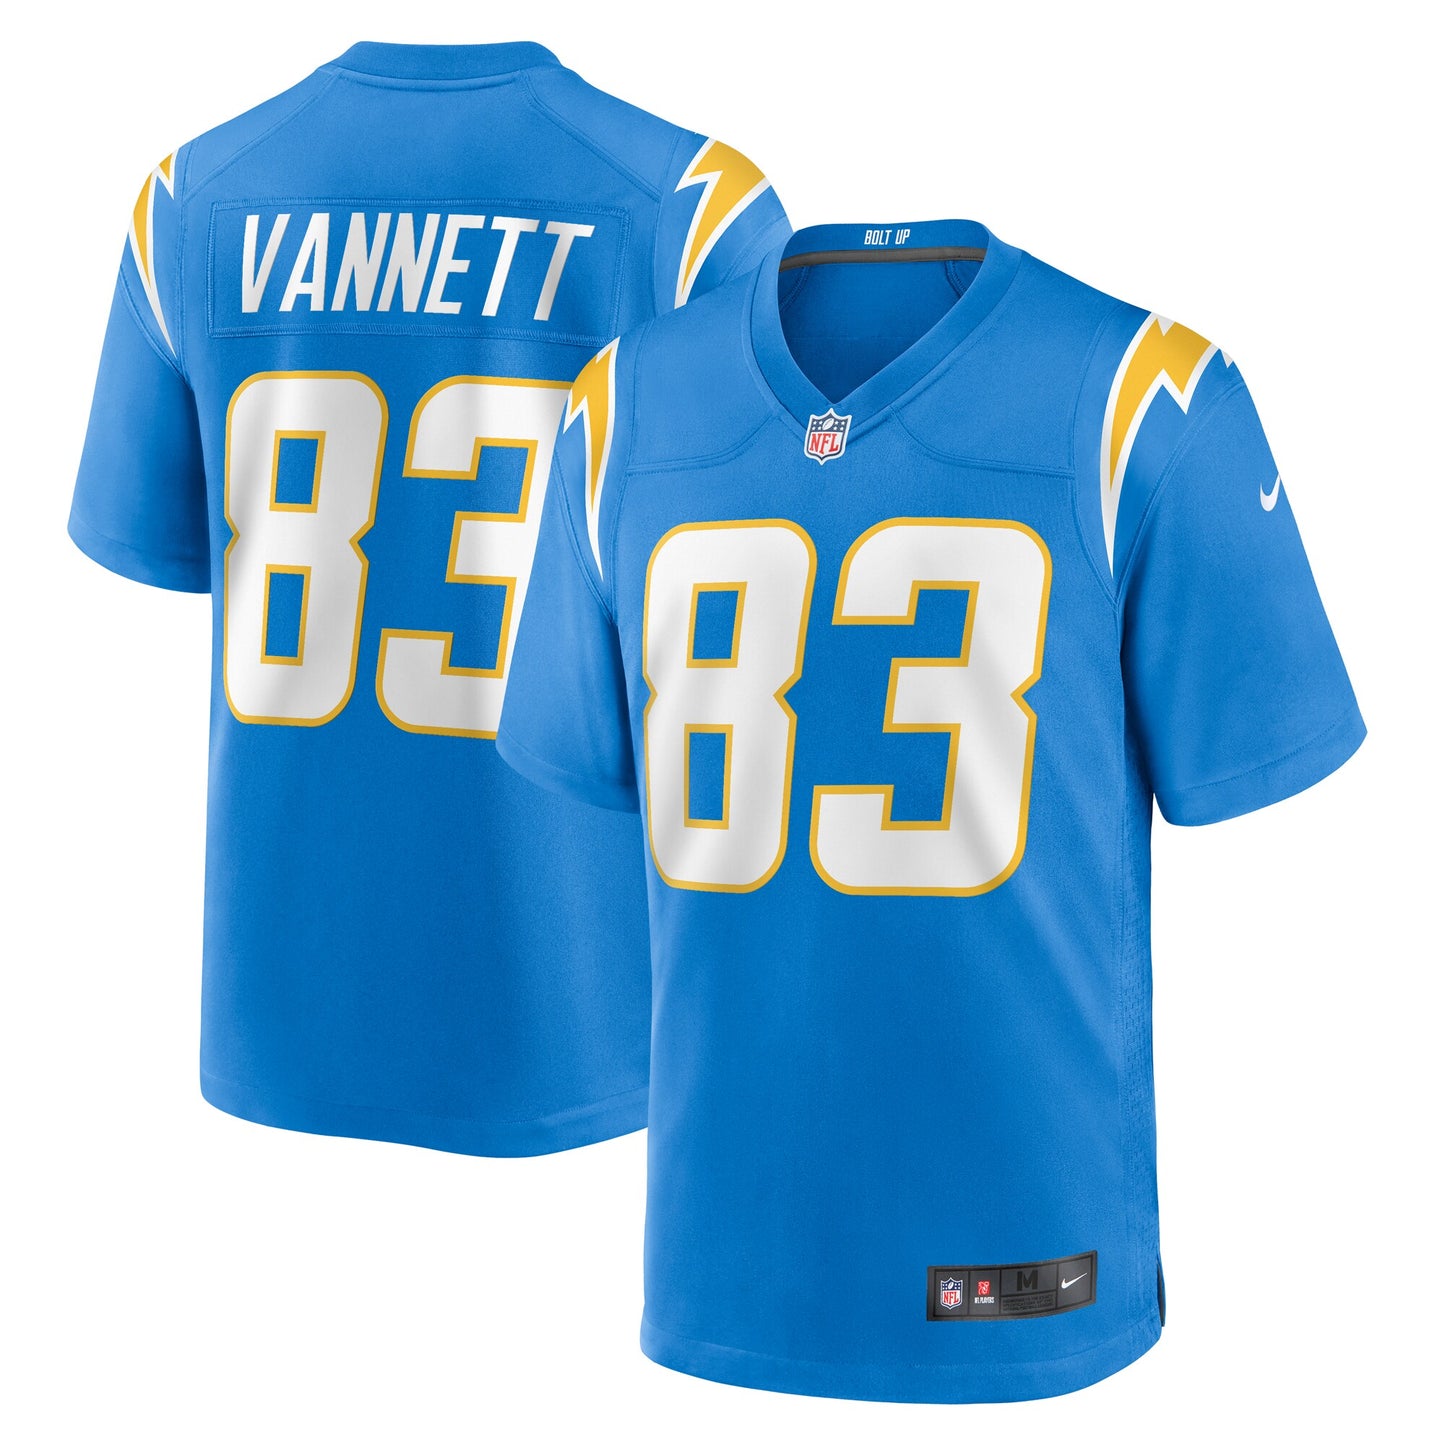 Nick Vannett Los Angeles Chargers Nike Team Game Jersey - Powder Blue